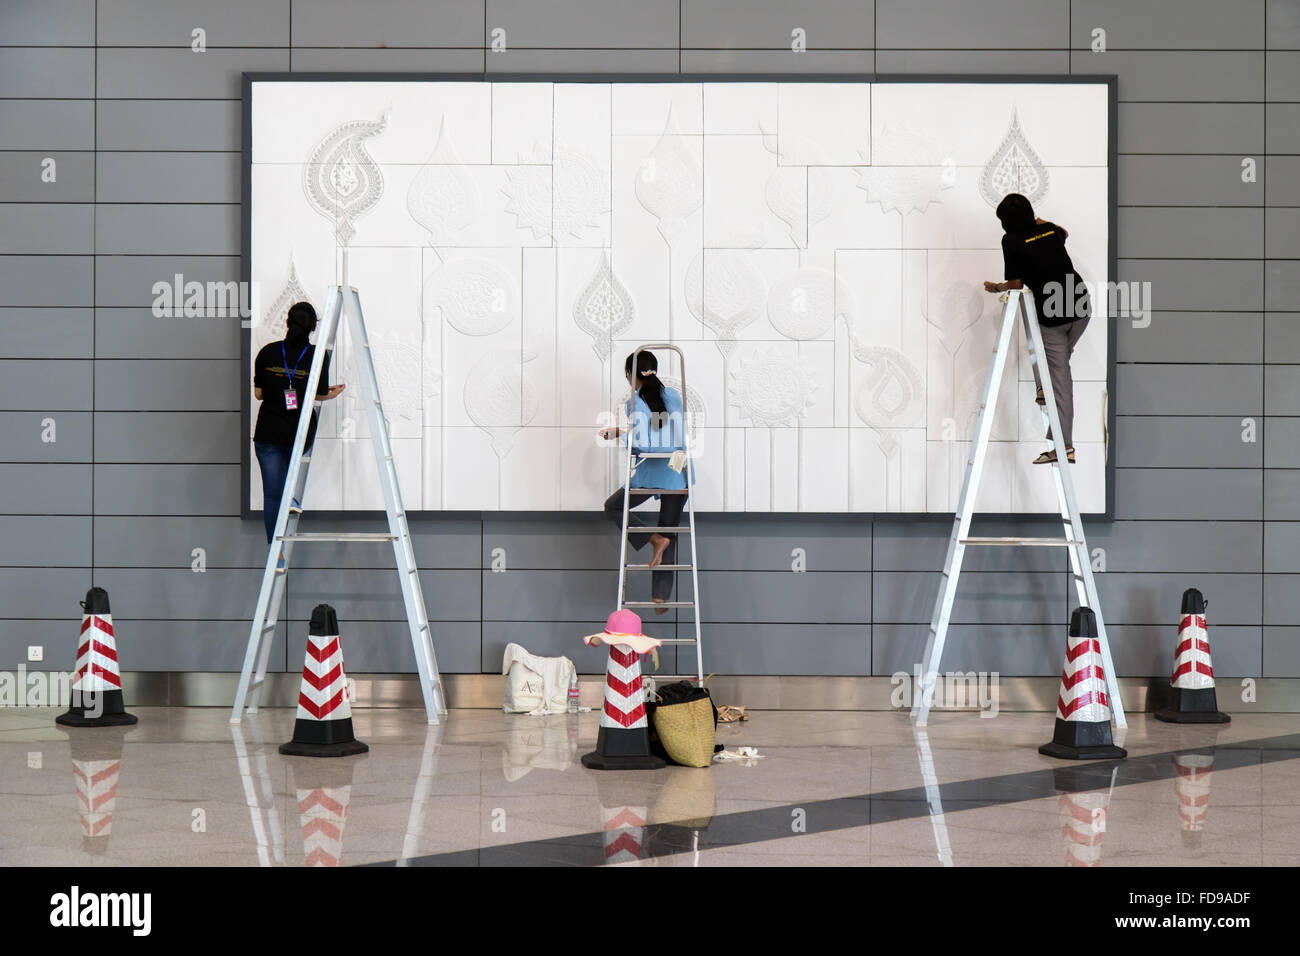 painters paint a picture on the wall in airport Stock Photo